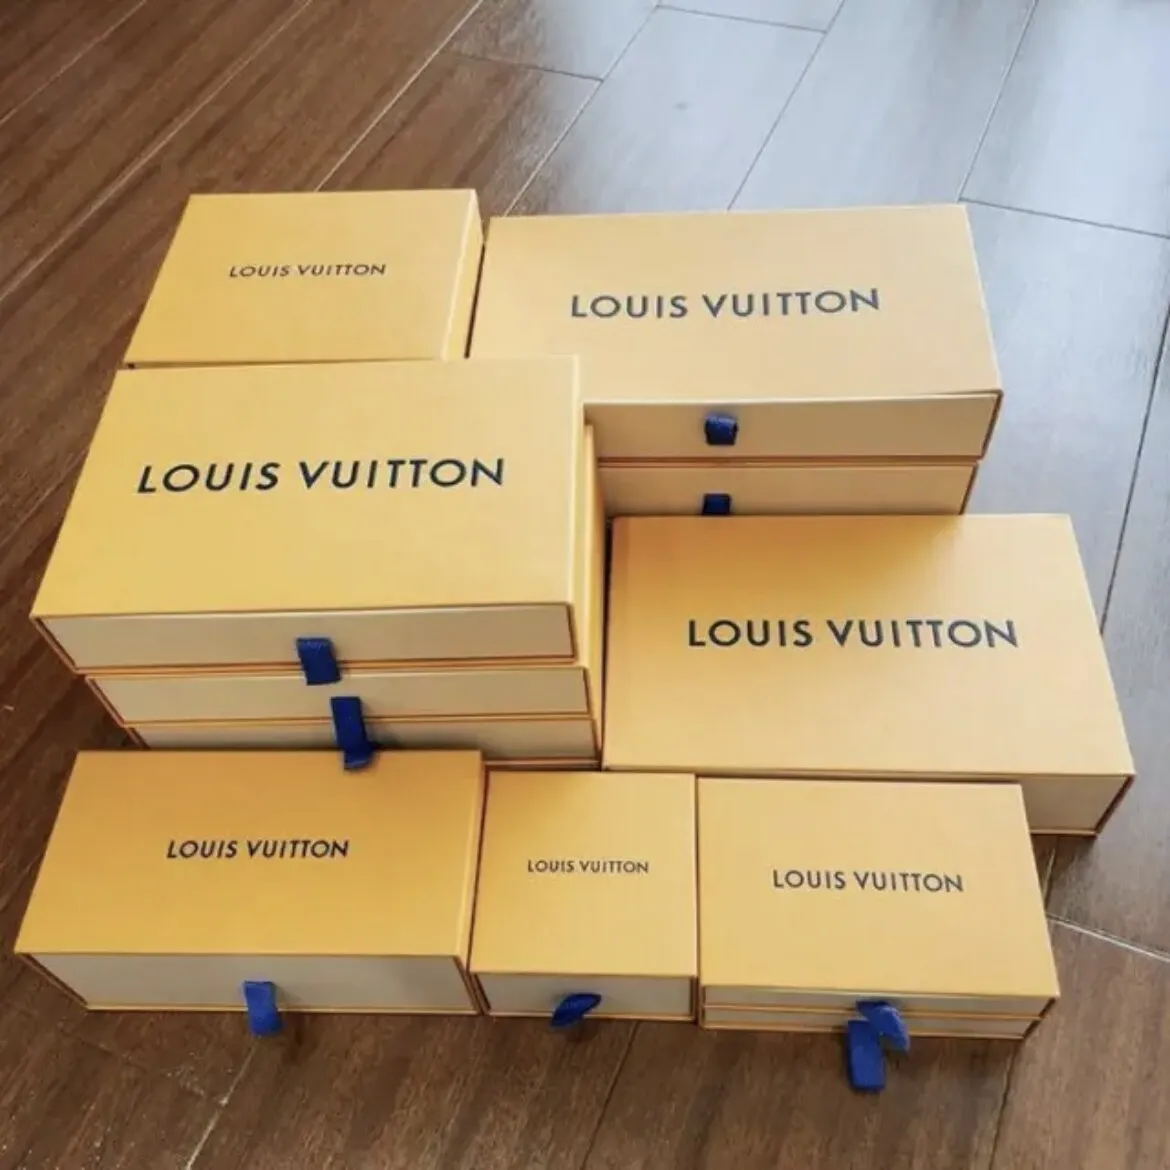 LOUIS VUITTON Authentic Empty Gift Box Small Medium Large Size